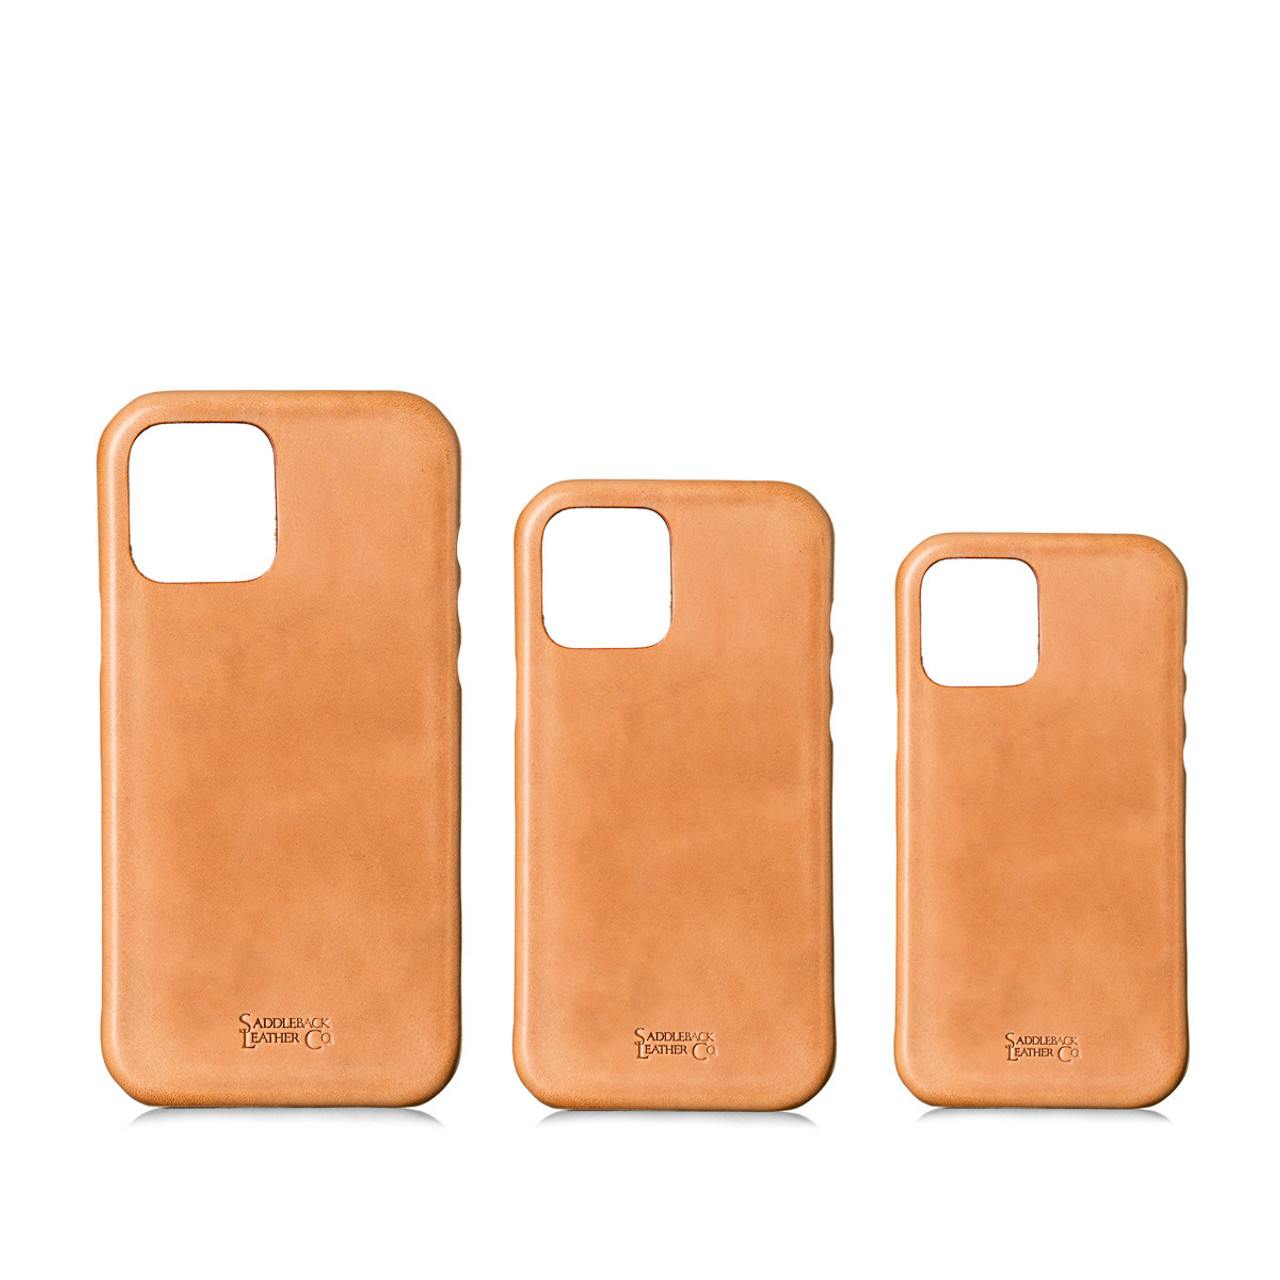 Leather iPhone Case, No Plastic Solid Leather 12 Pro and Max